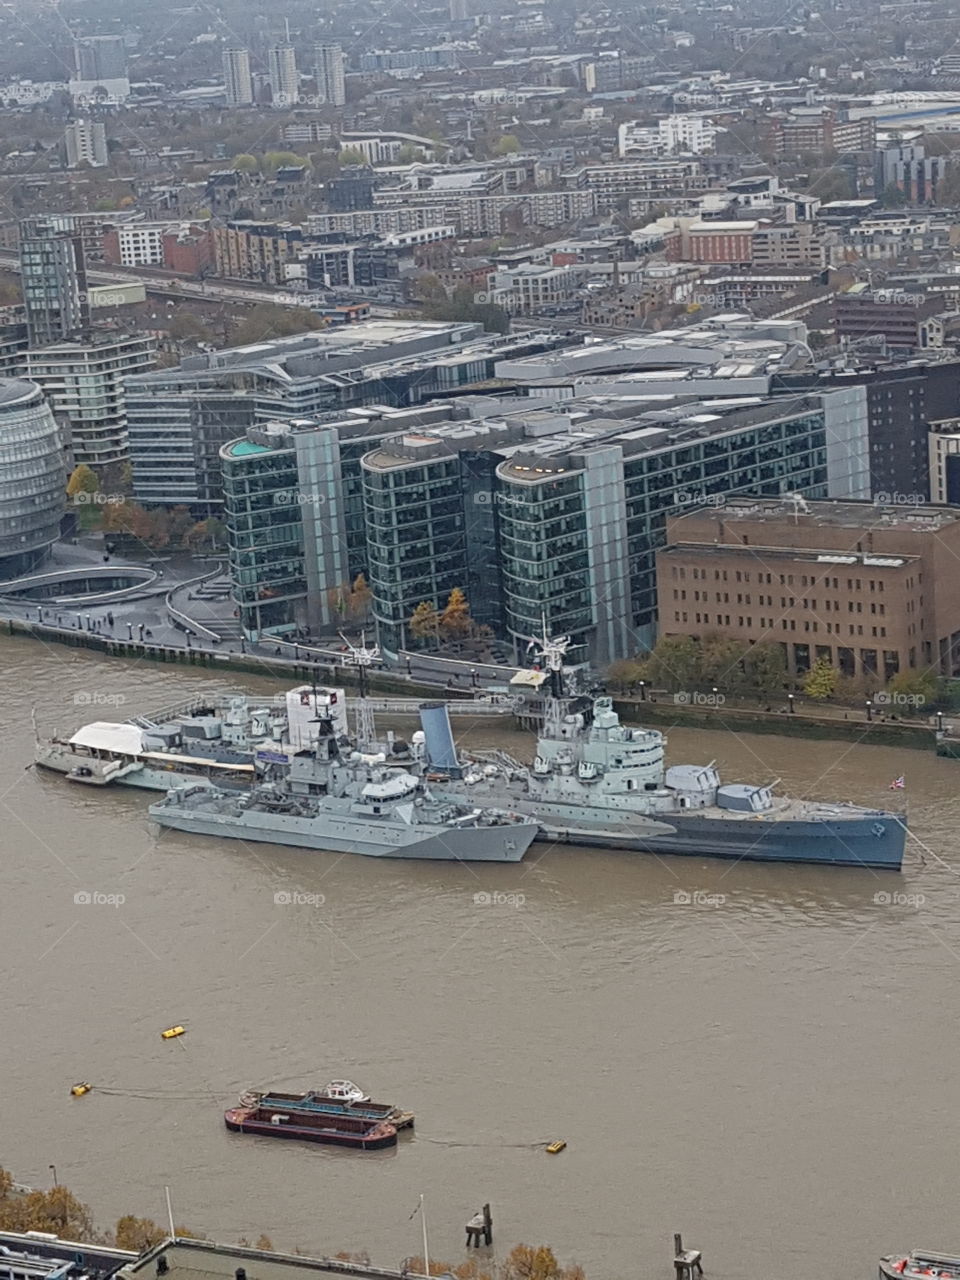 view of the battleship on the river Thames from the walkie talkie building